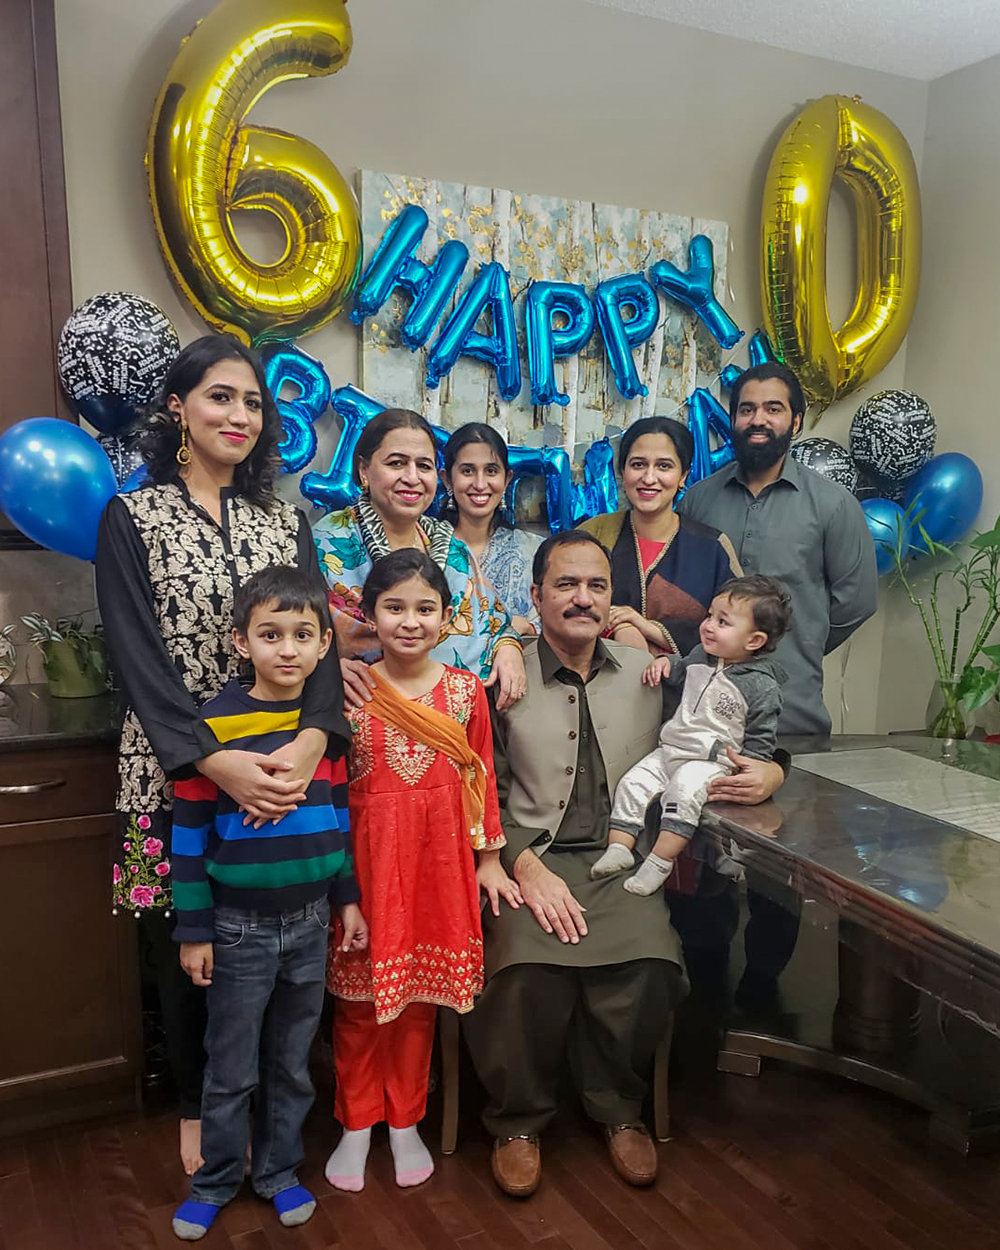 Mirza Attaullah, Surmont site services coordinator, celebrates with his family on his 60th birthday.